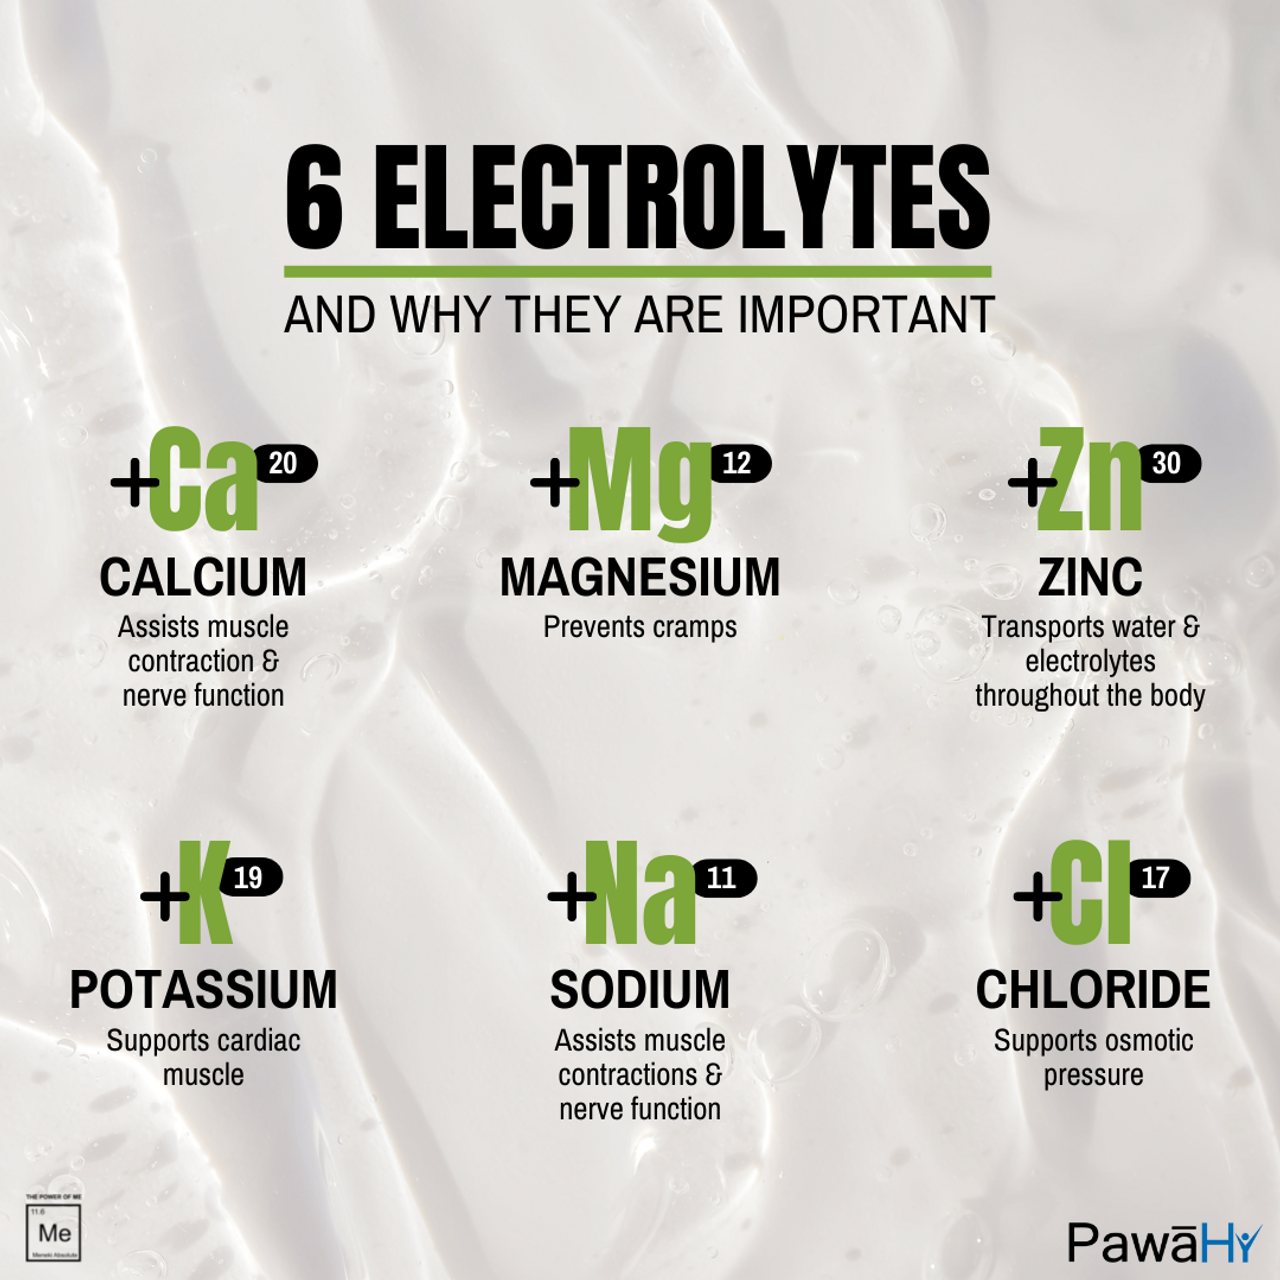 PawaHy Isotonic Workout Electrolyte Energy Drink With 2:1:1 BCAA,L-Glutamine- 1kg -Green Mango